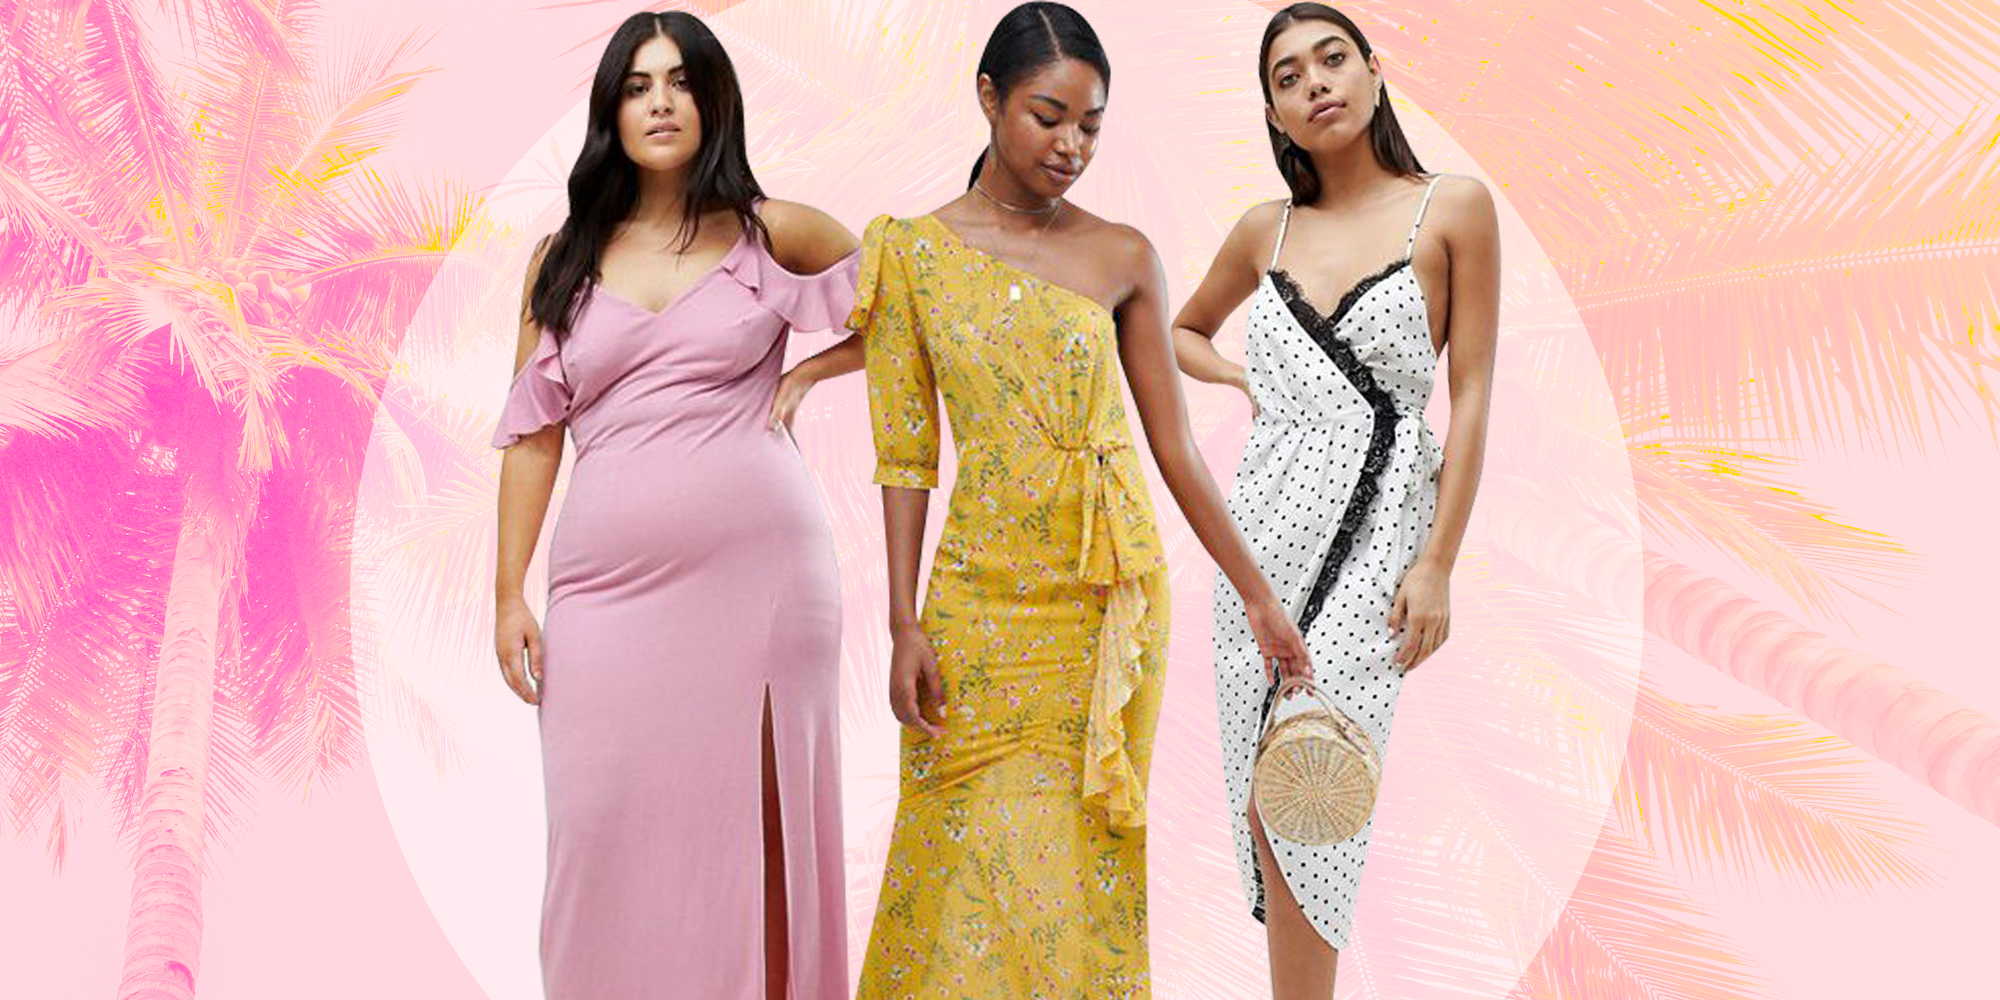 asos clearance dresses